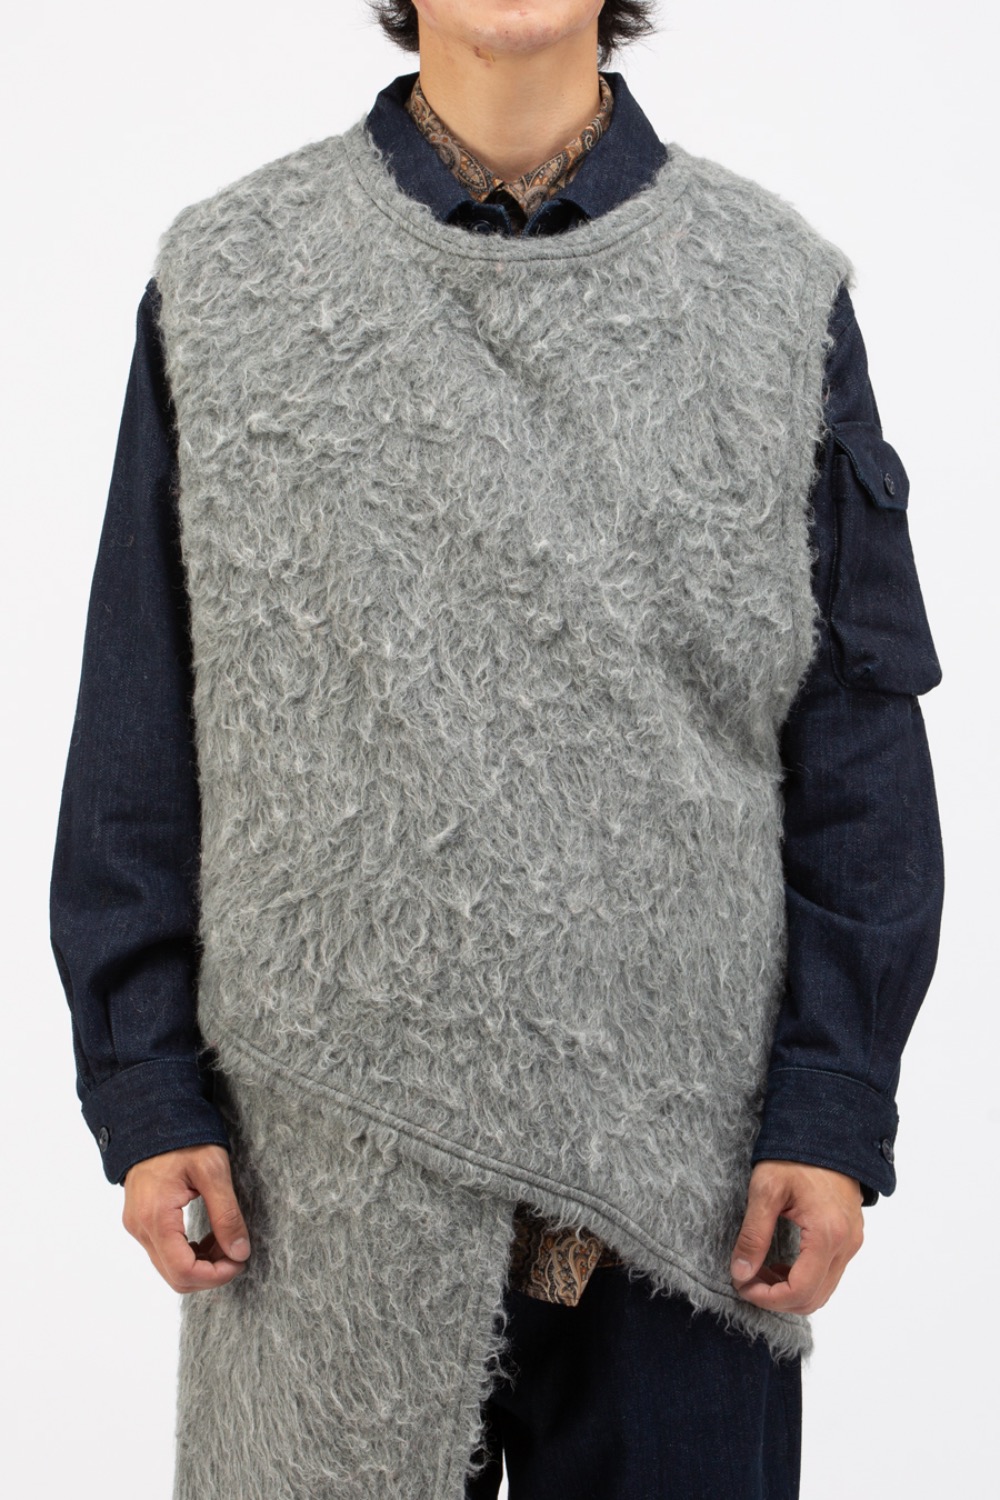 WRAP KNIT VEST HEATHER GREY SOLID MOHAIR